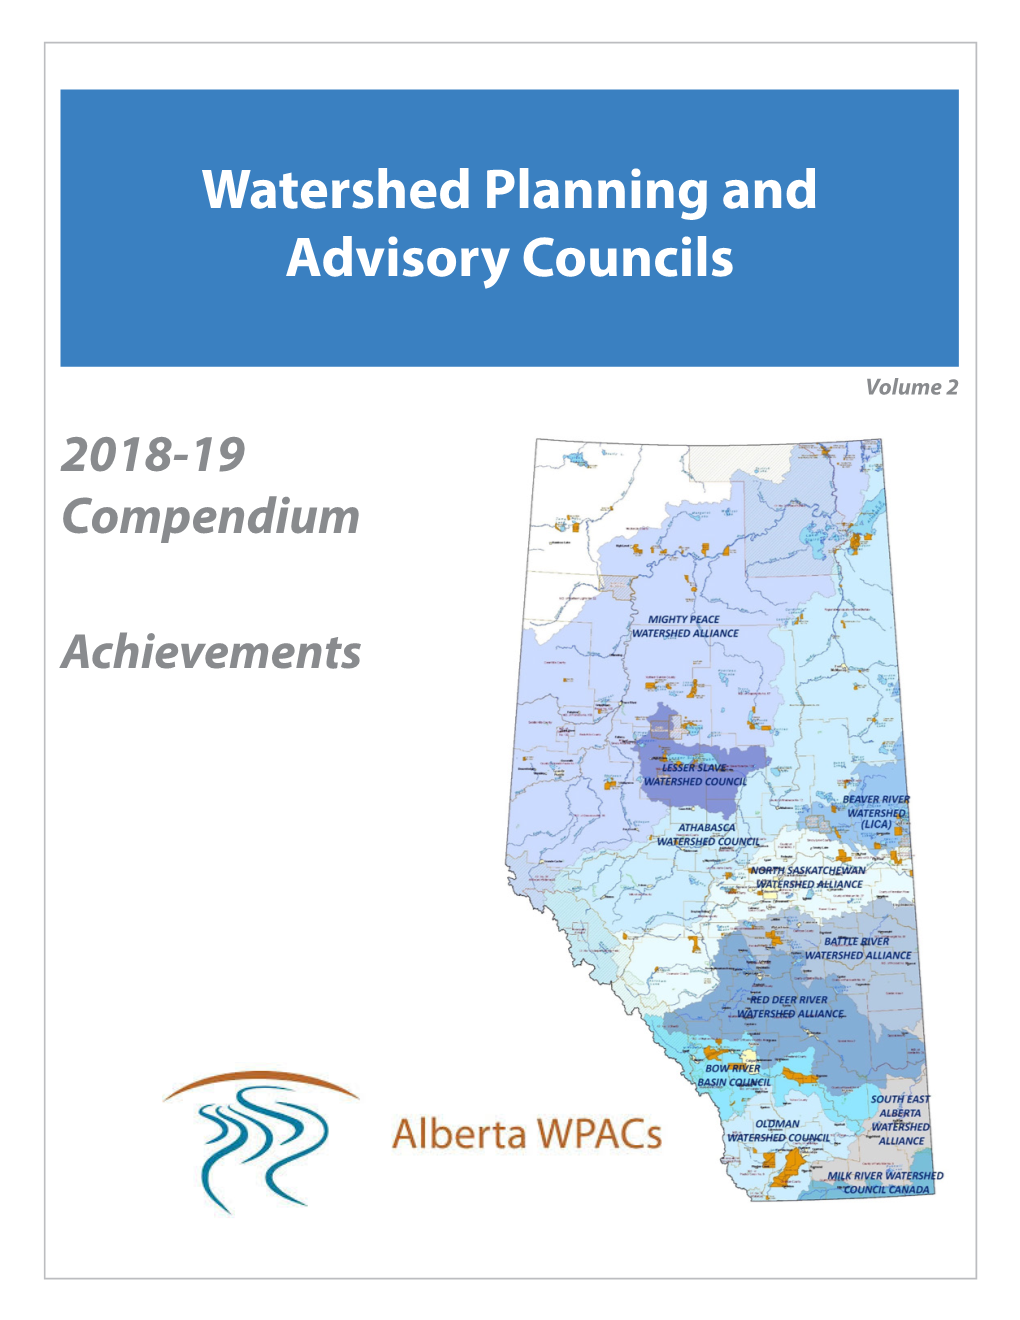 Watershed Planning and Advisory Councils